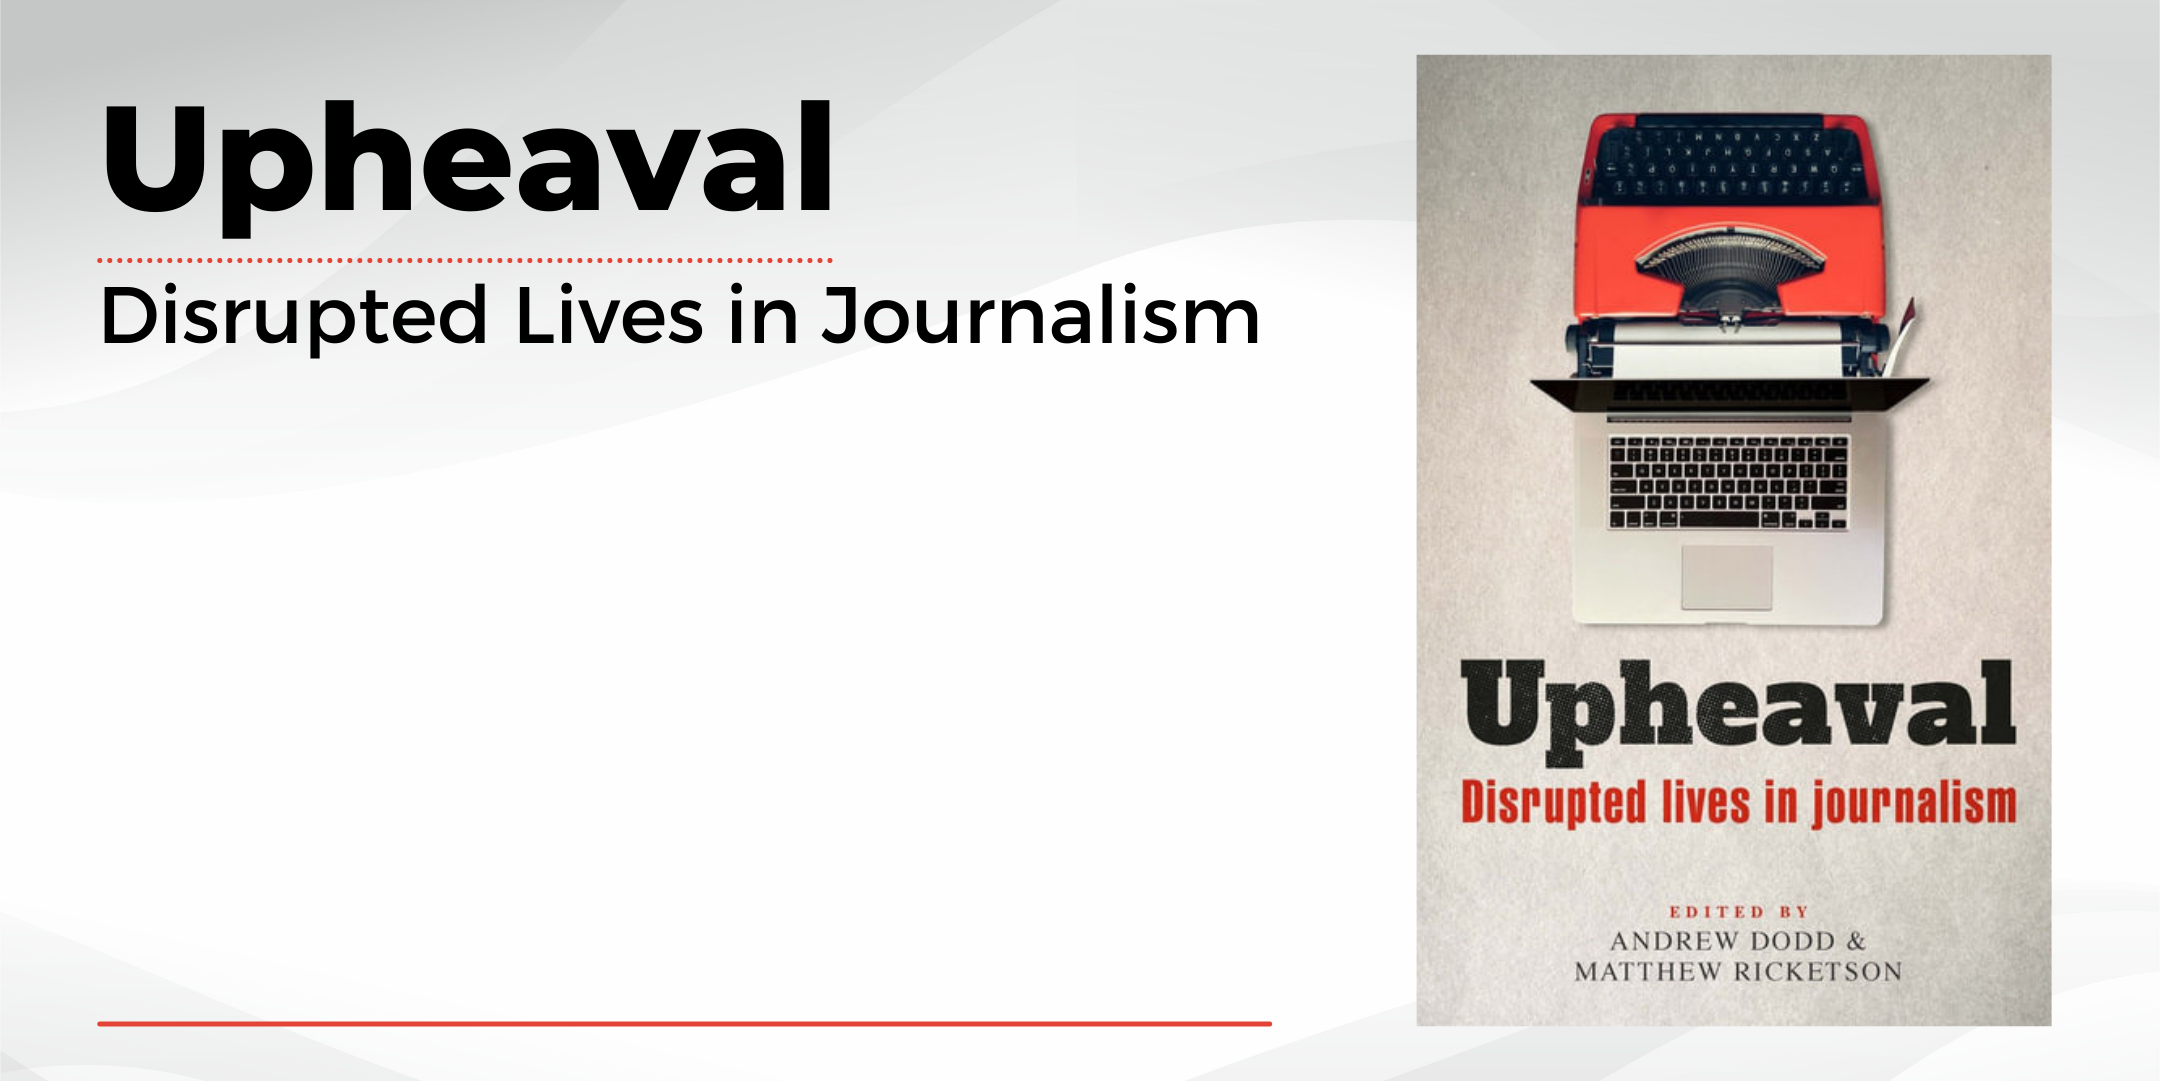 Upheaval: Disrupted Lives in Journalism Book Launch